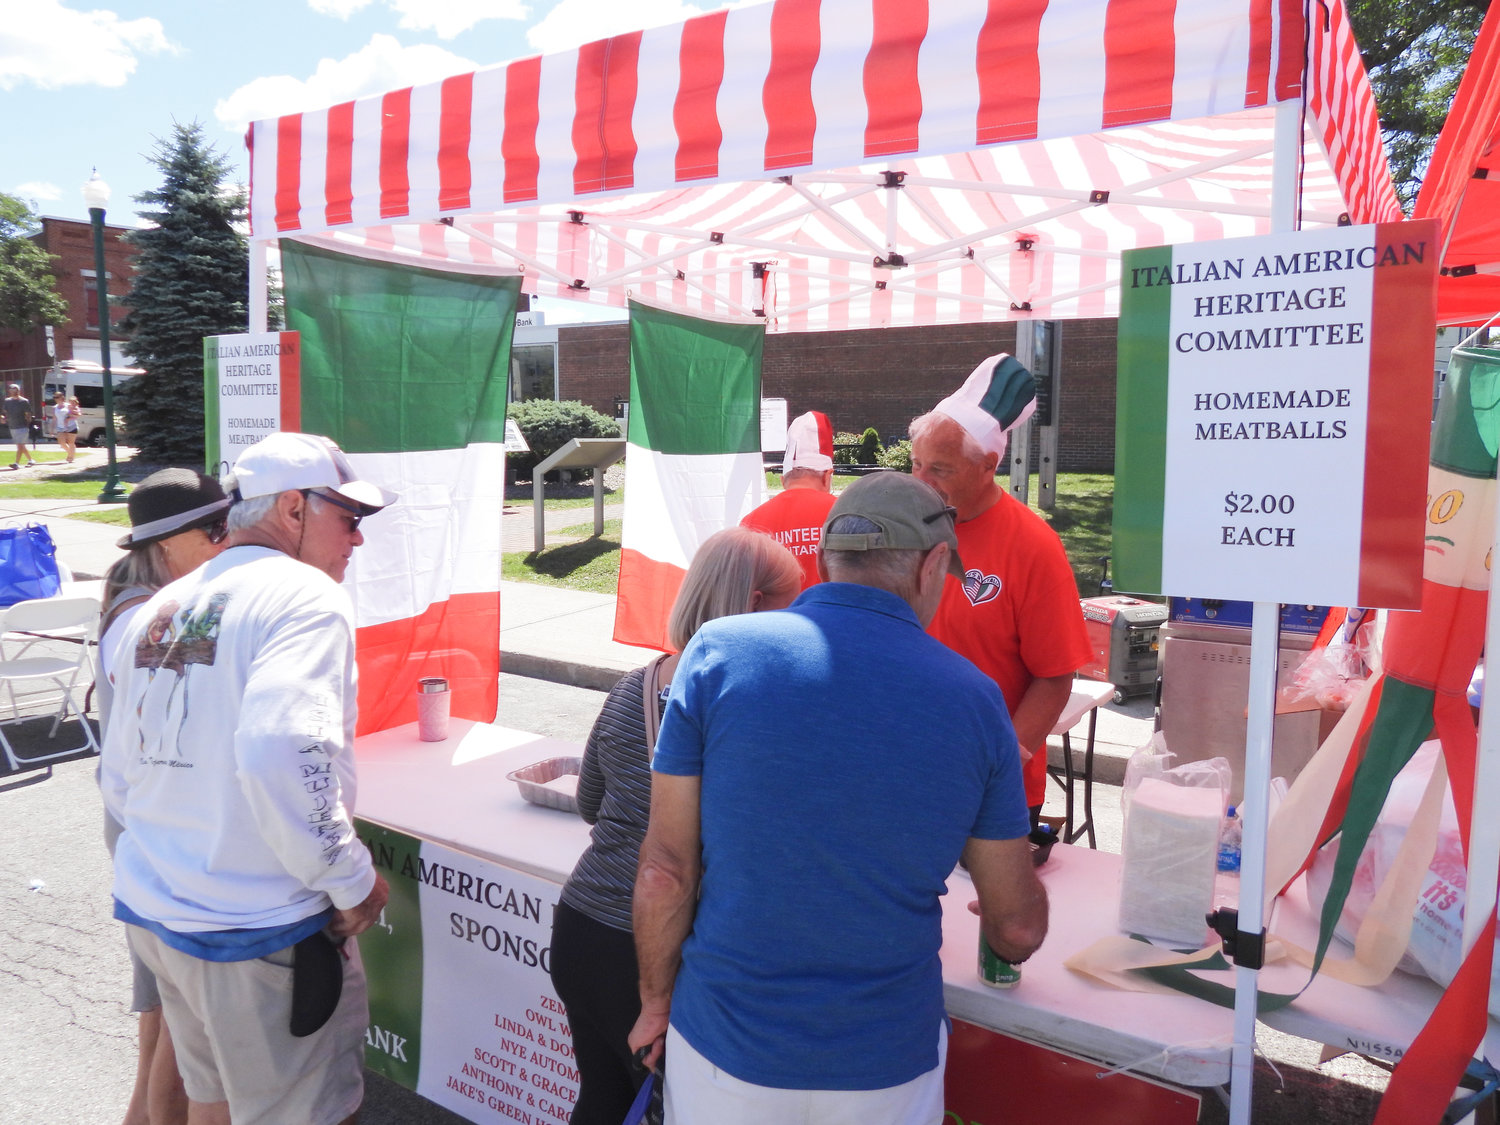 Residents came out for a day of fun and a taste of Italy at the Canastota Italian Heritage Festival on Saturday, Aug. 13.